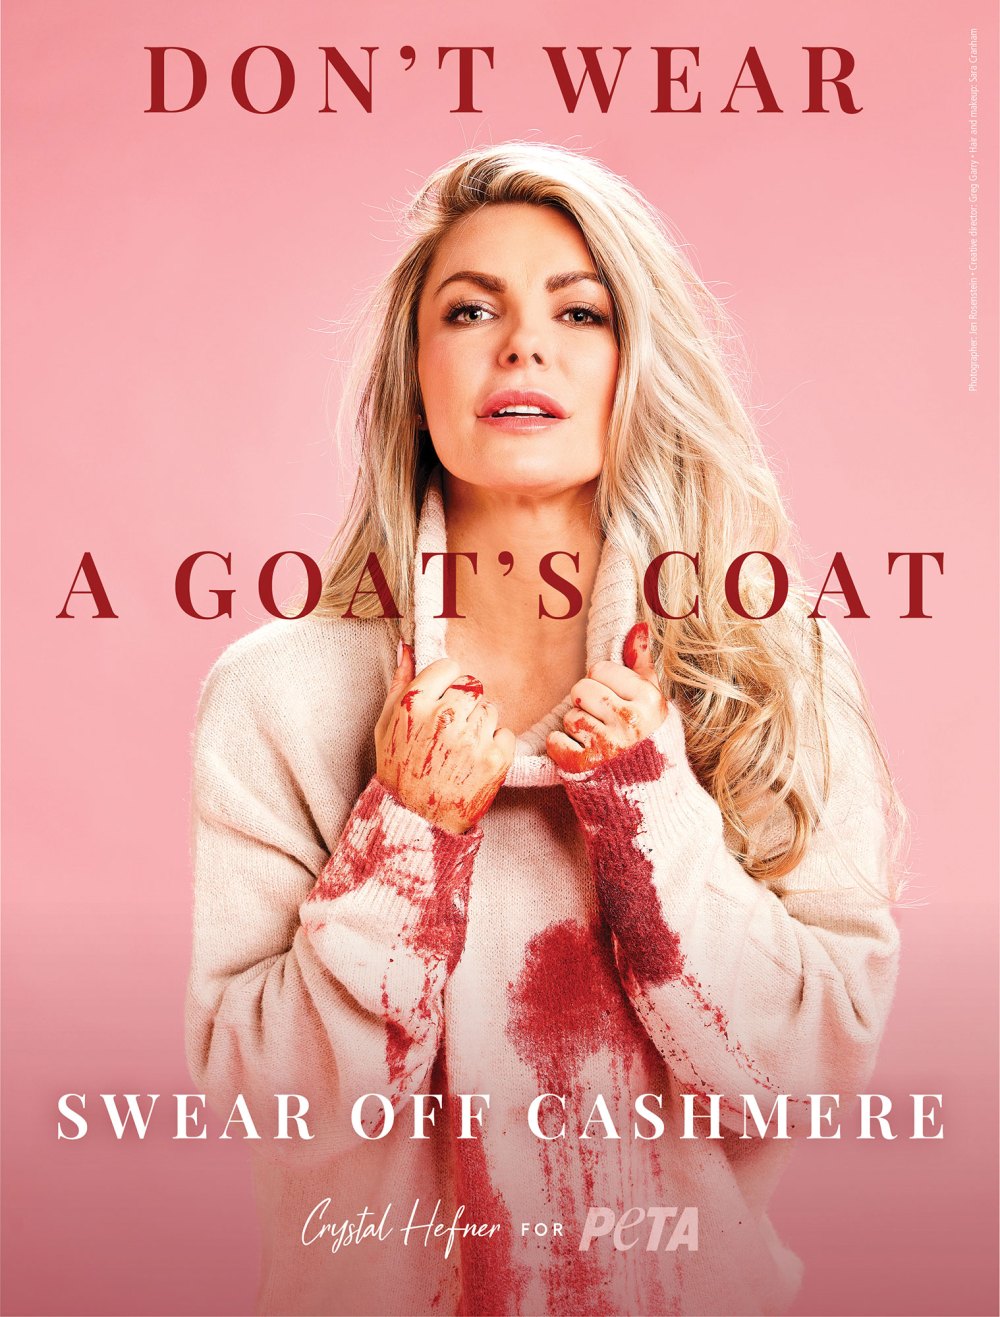 Crystal Hefner teams up with PETA to campaign against cashmere cruelty